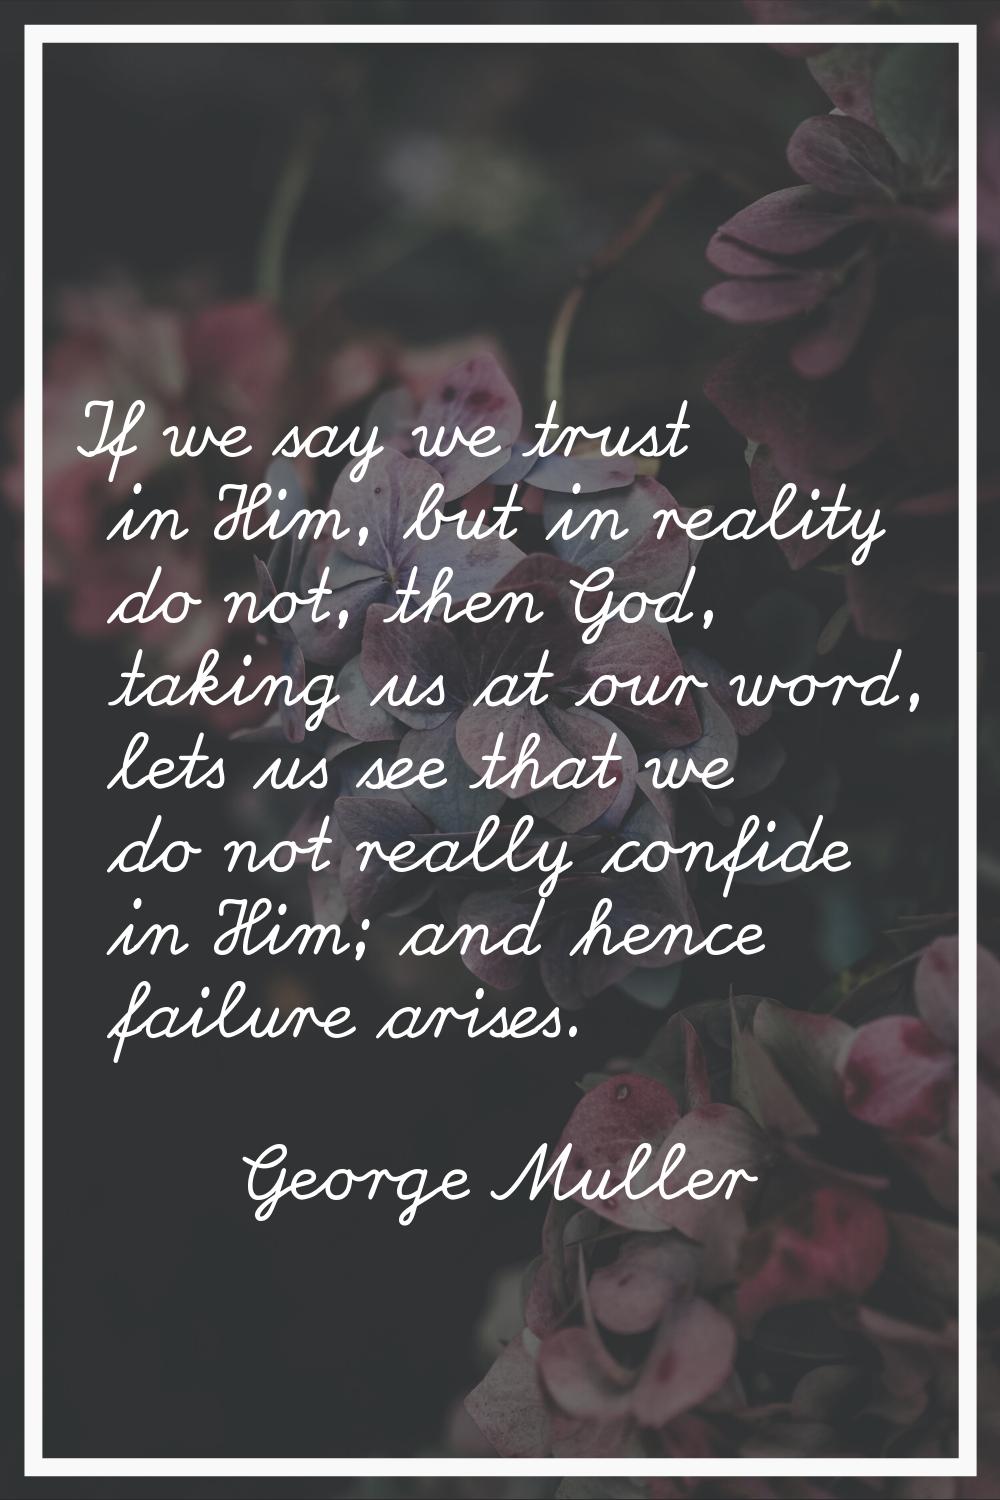 If we say we trust in Him, but in reality do not, then God, taking us at our word, lets us see that